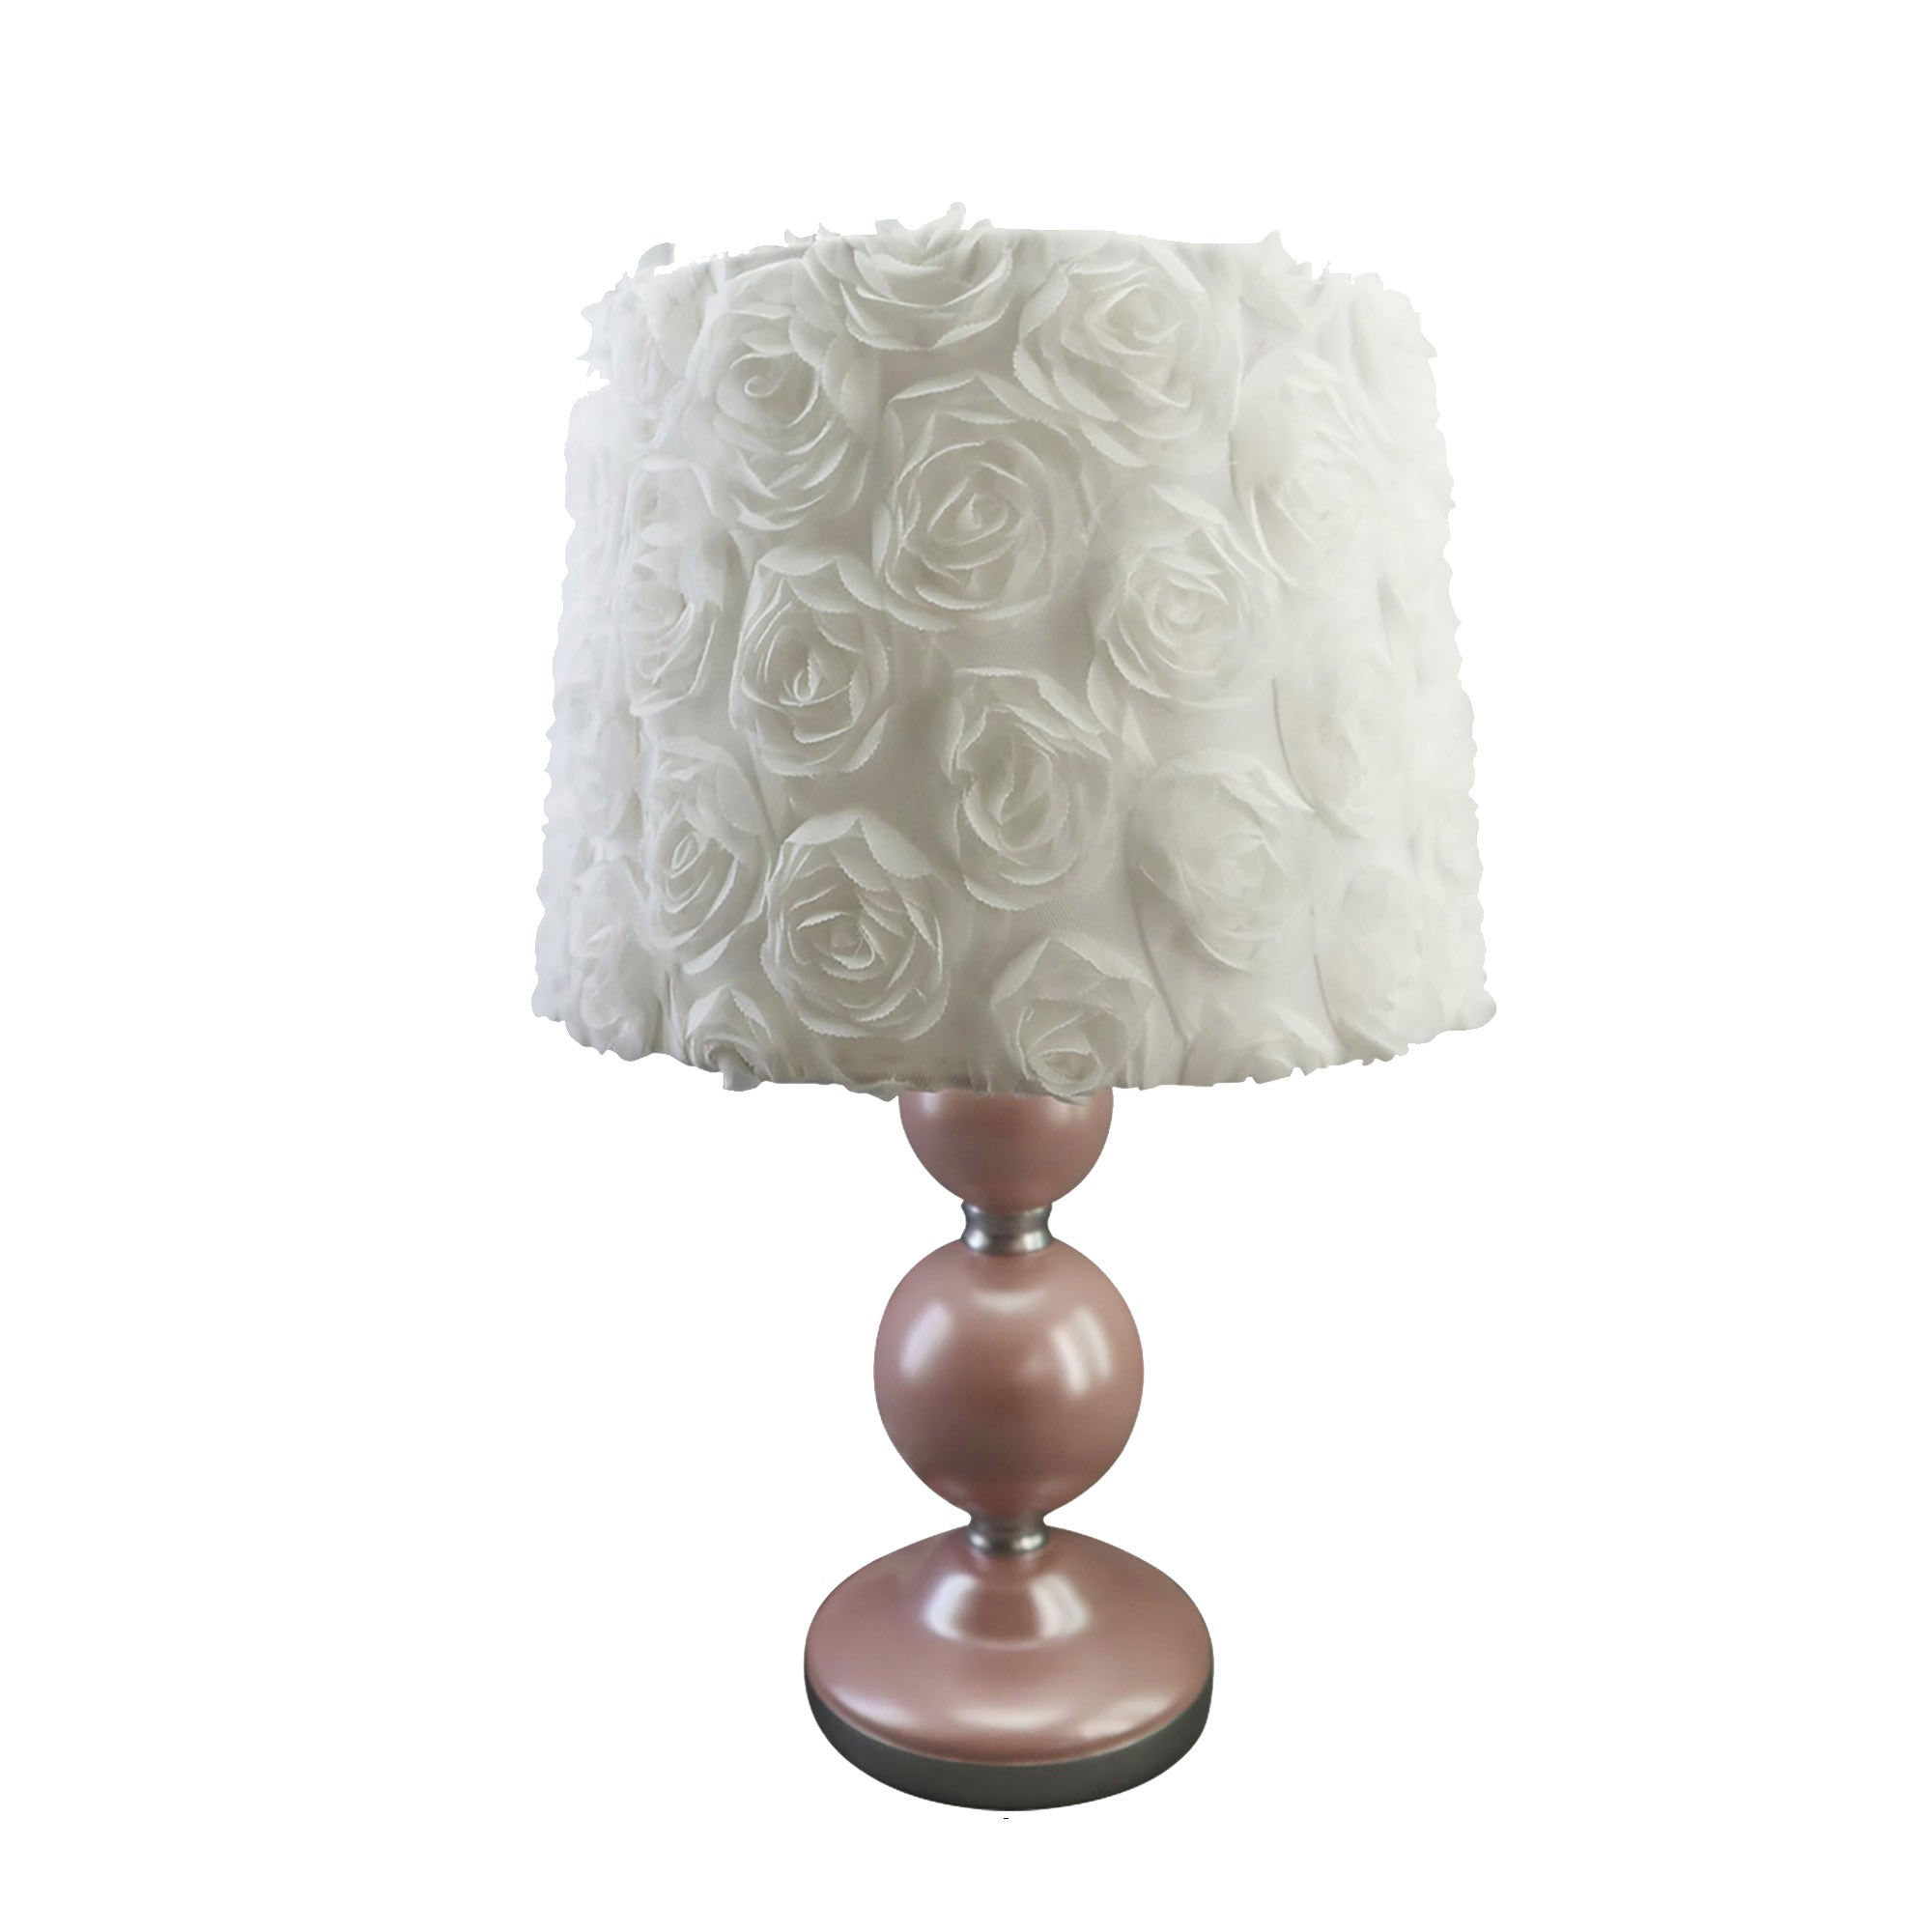 Colette Lamp Base and Shade